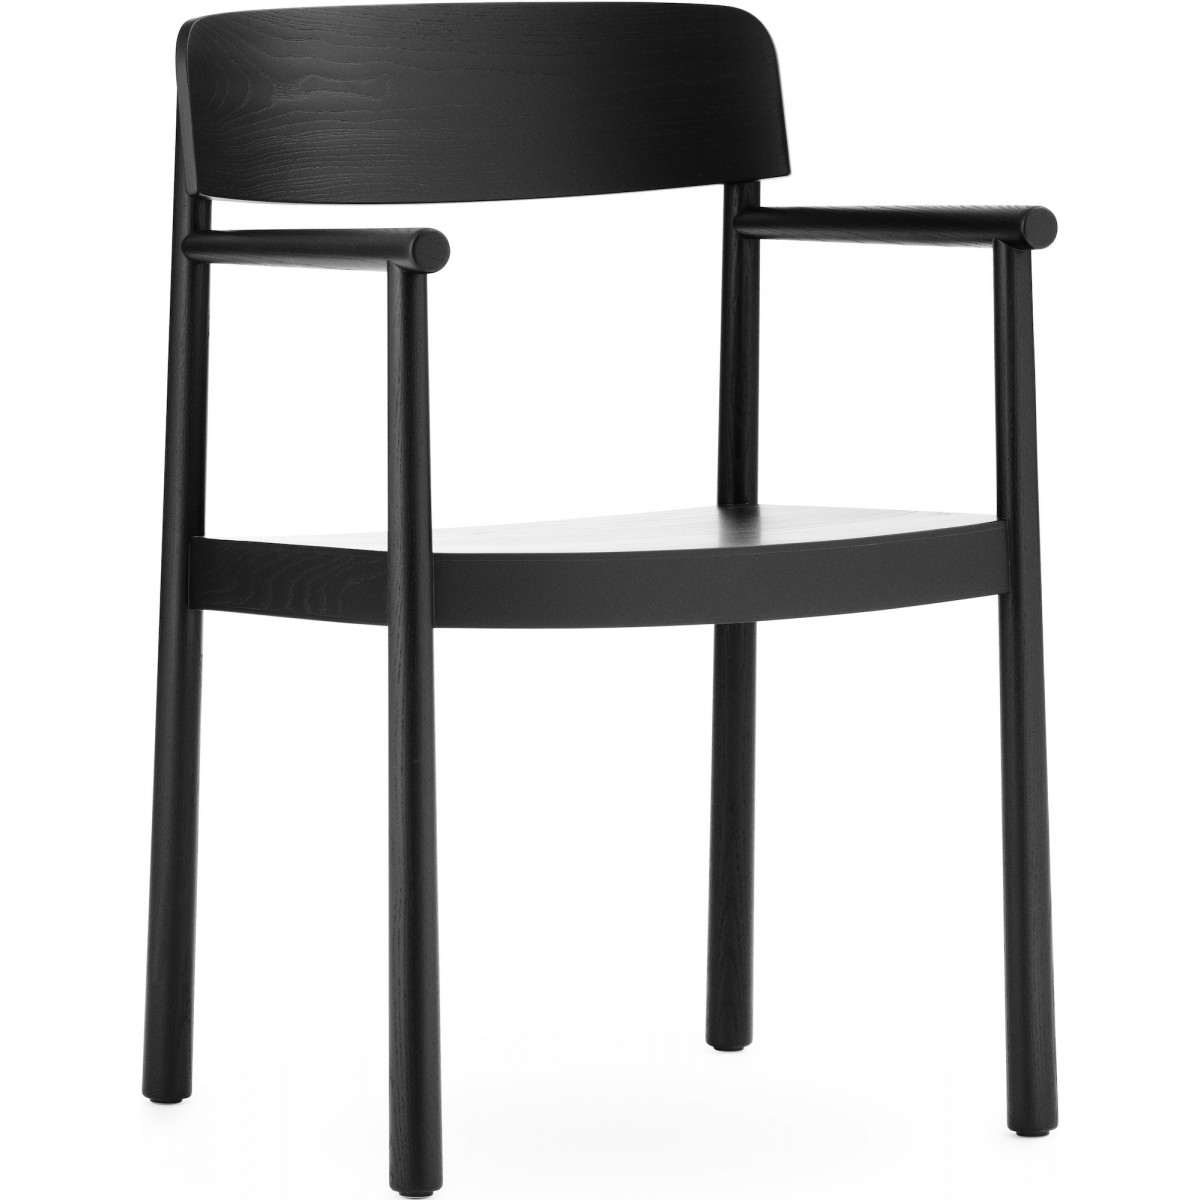 Black lacquered ash – Timb Armchair